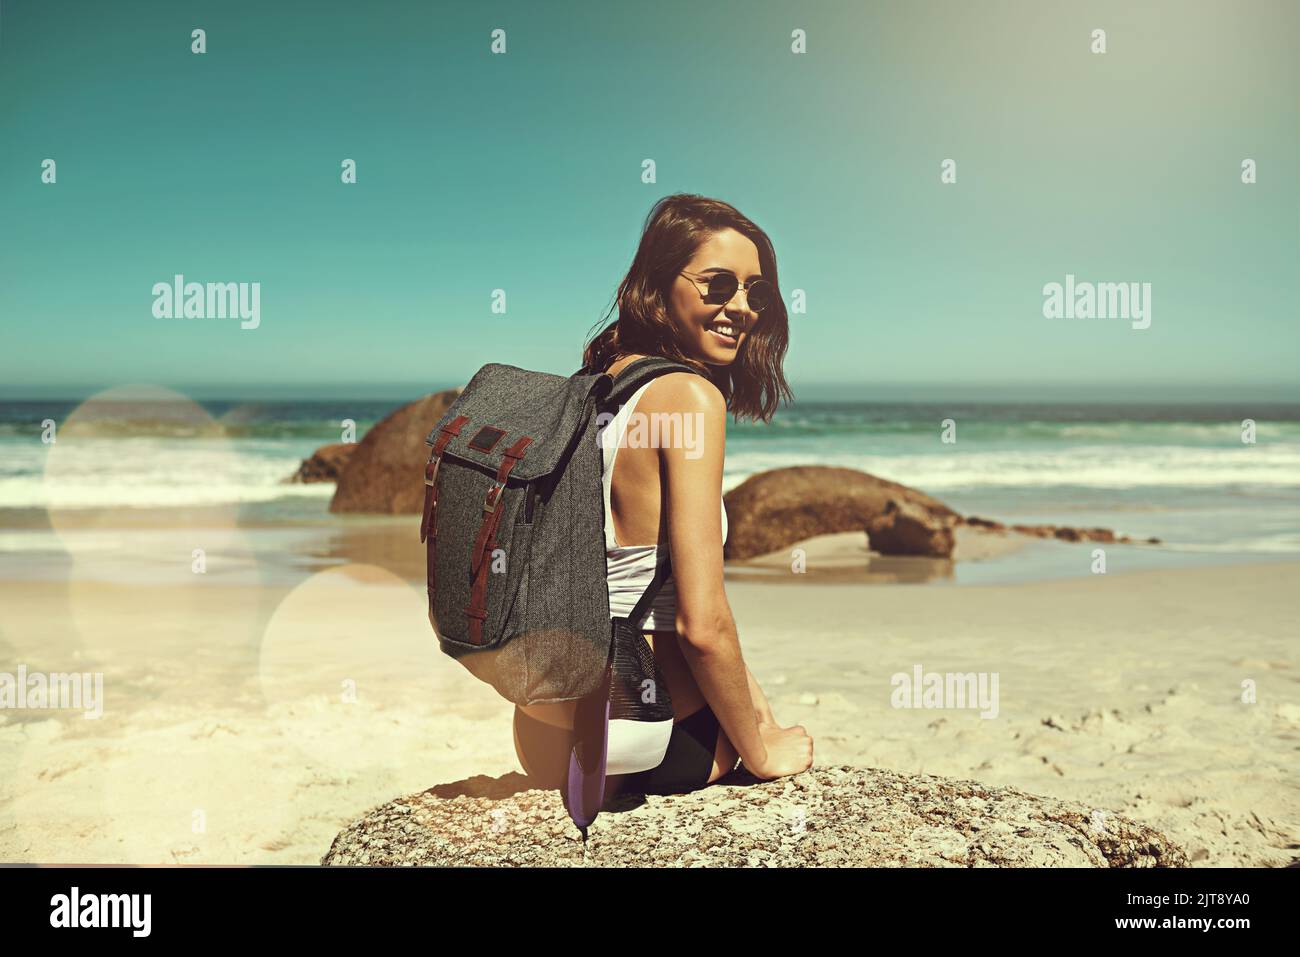 Traveling is more than the seeing of sights. a backpacker enjoying a day at the beach. Stock Photo